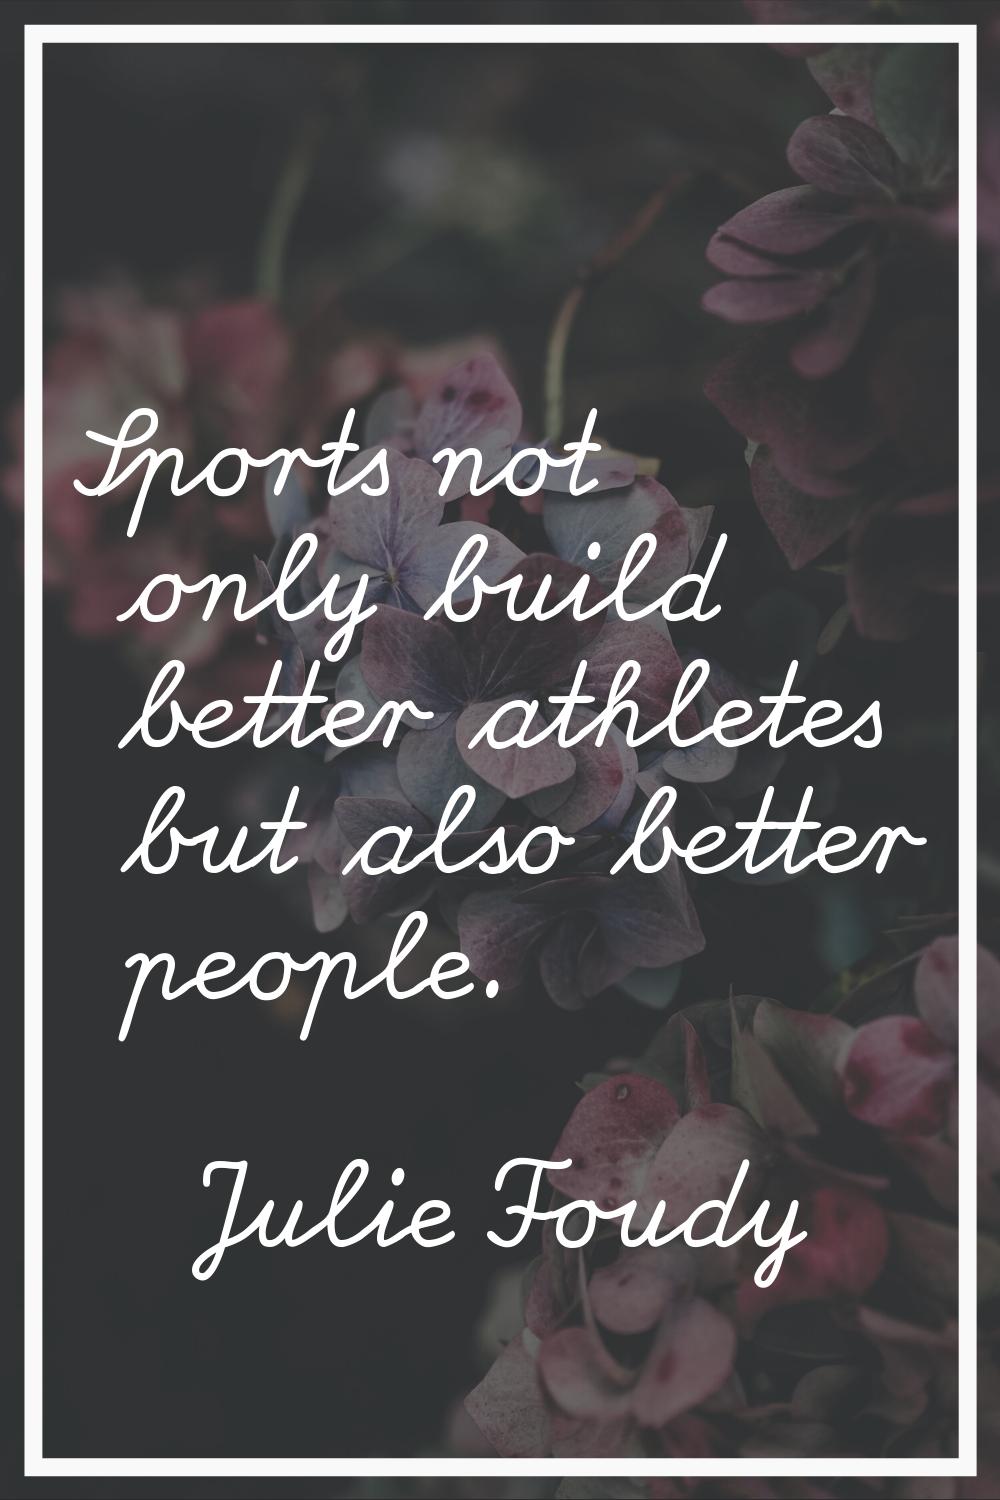 Sports not only build better athletes but also better people.